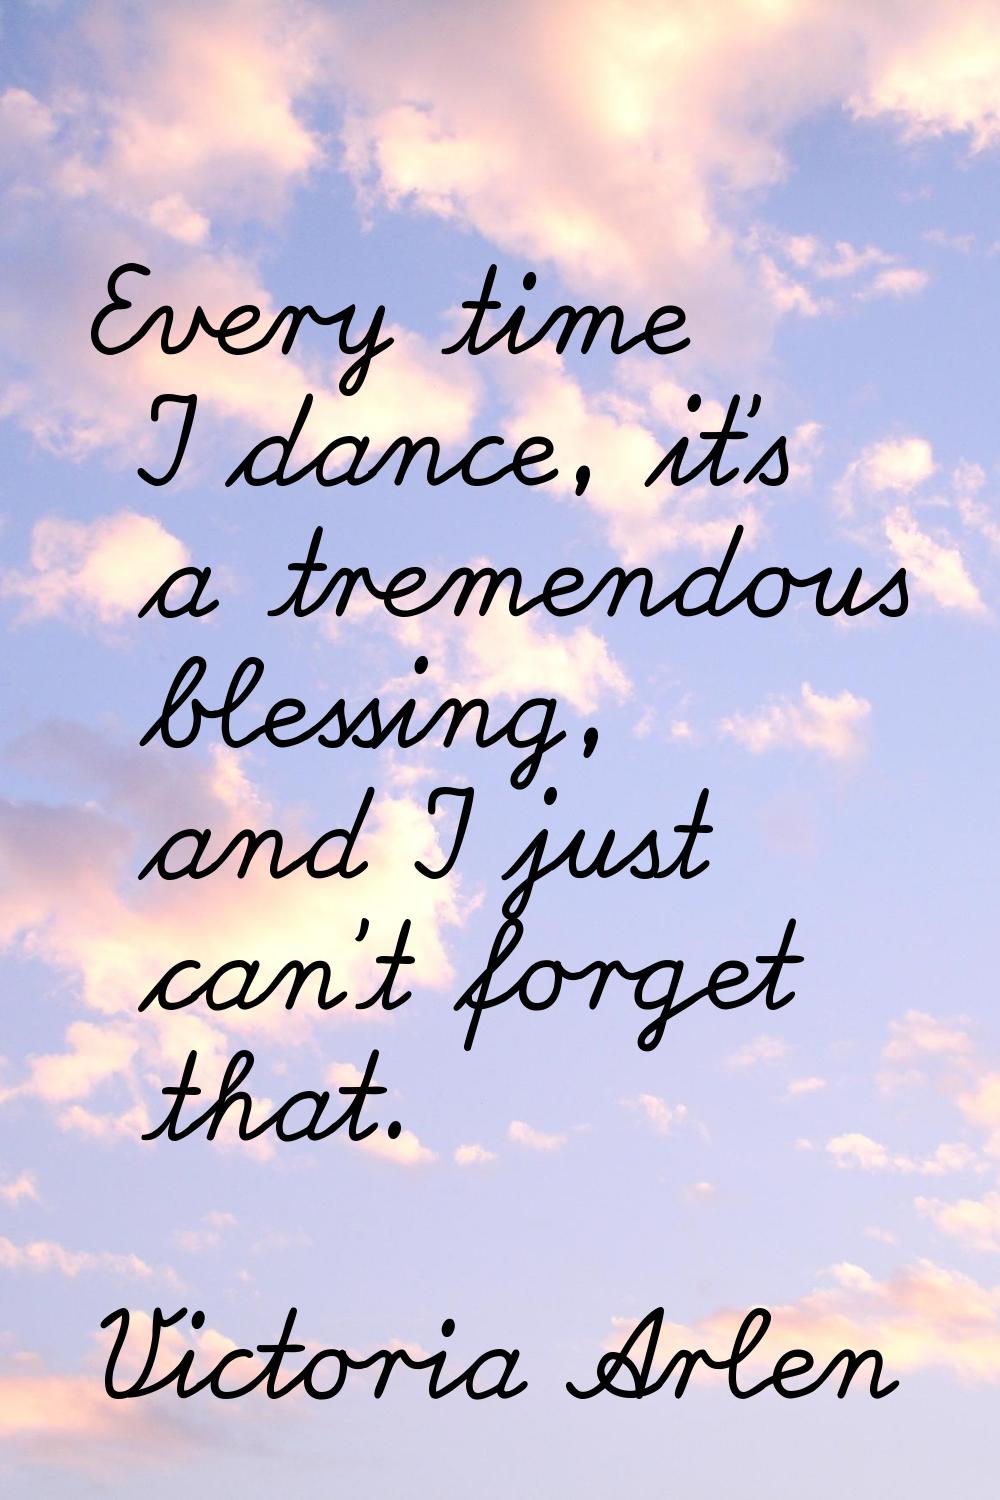 Every time I dance, it's a tremendous blessing, and I just can't forget that.